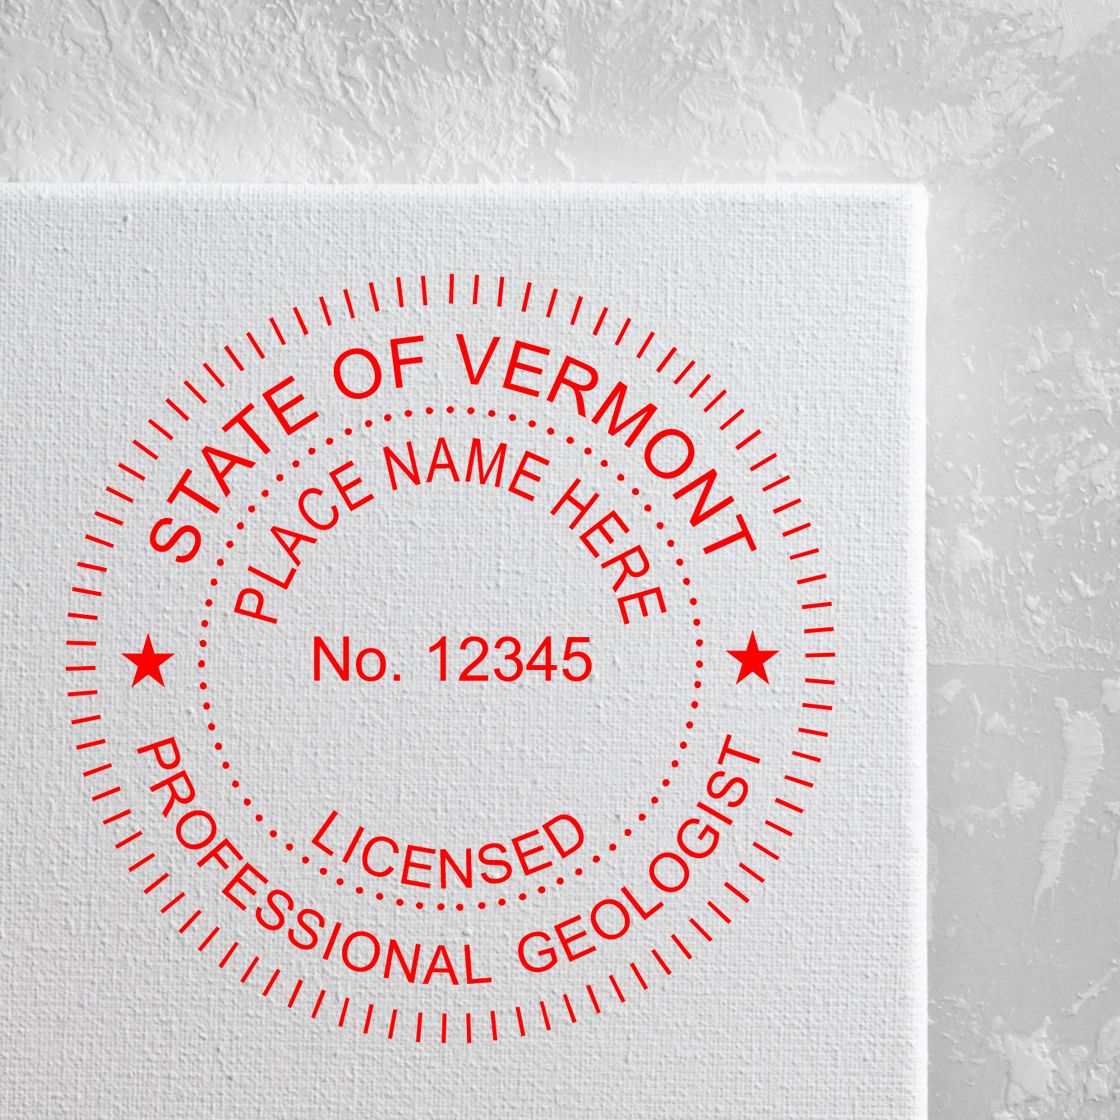 A lifestyle photo showing a stamped image of the Vermont Professional Geologist Seal Stamp on a piece of paper